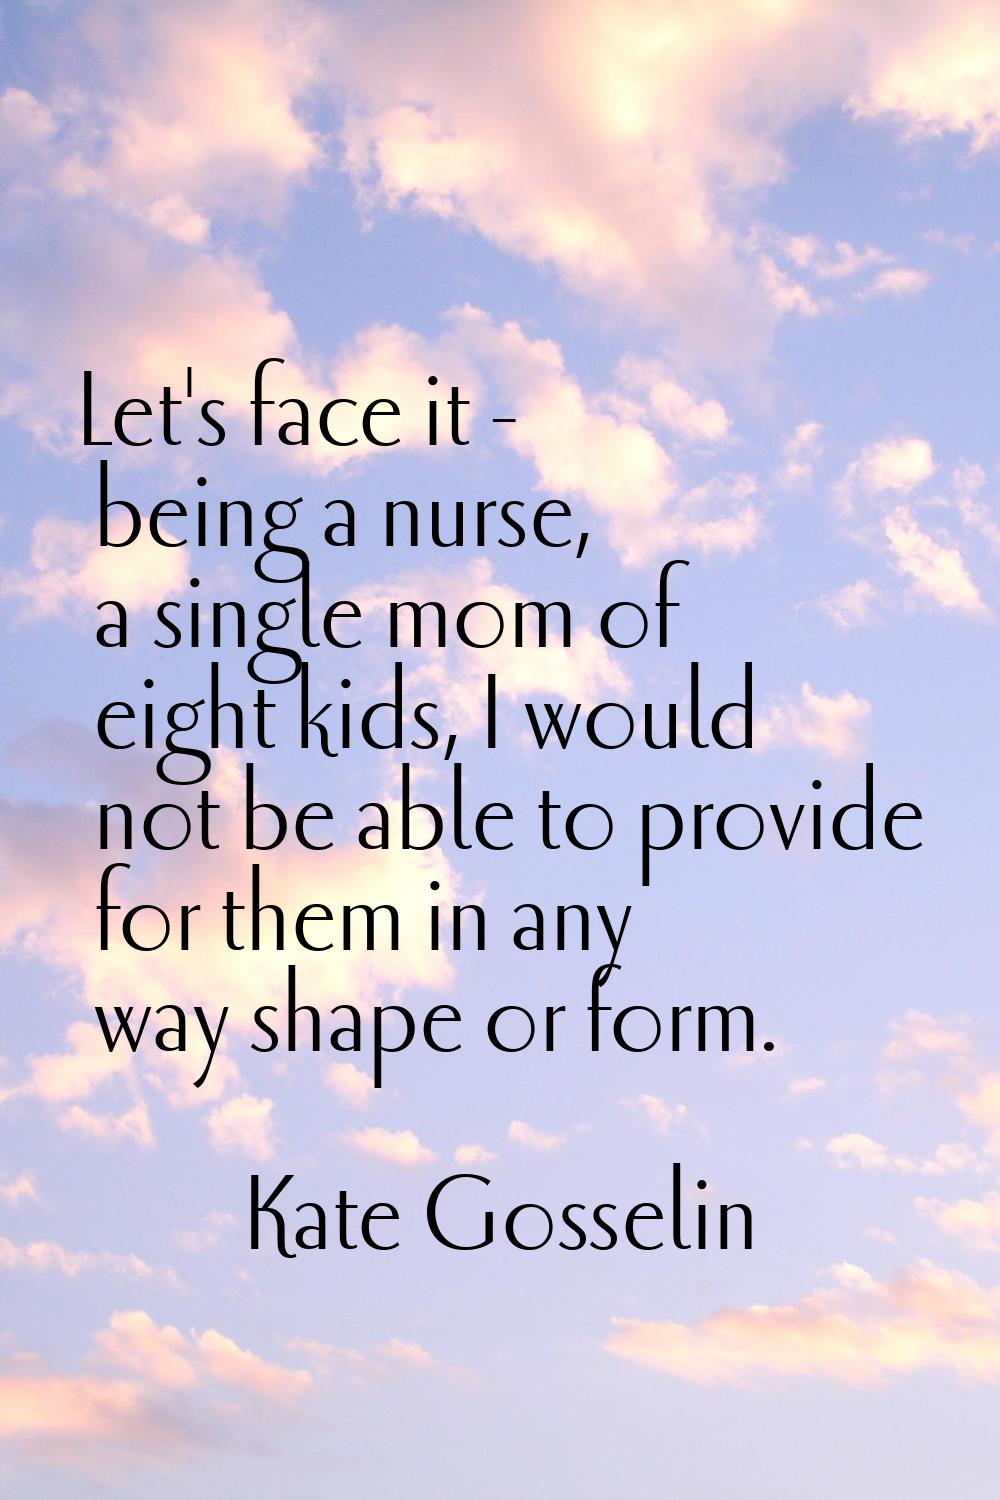 Let's face it - being a nurse, a single mom of eight kids, I would not be able to provide for them 